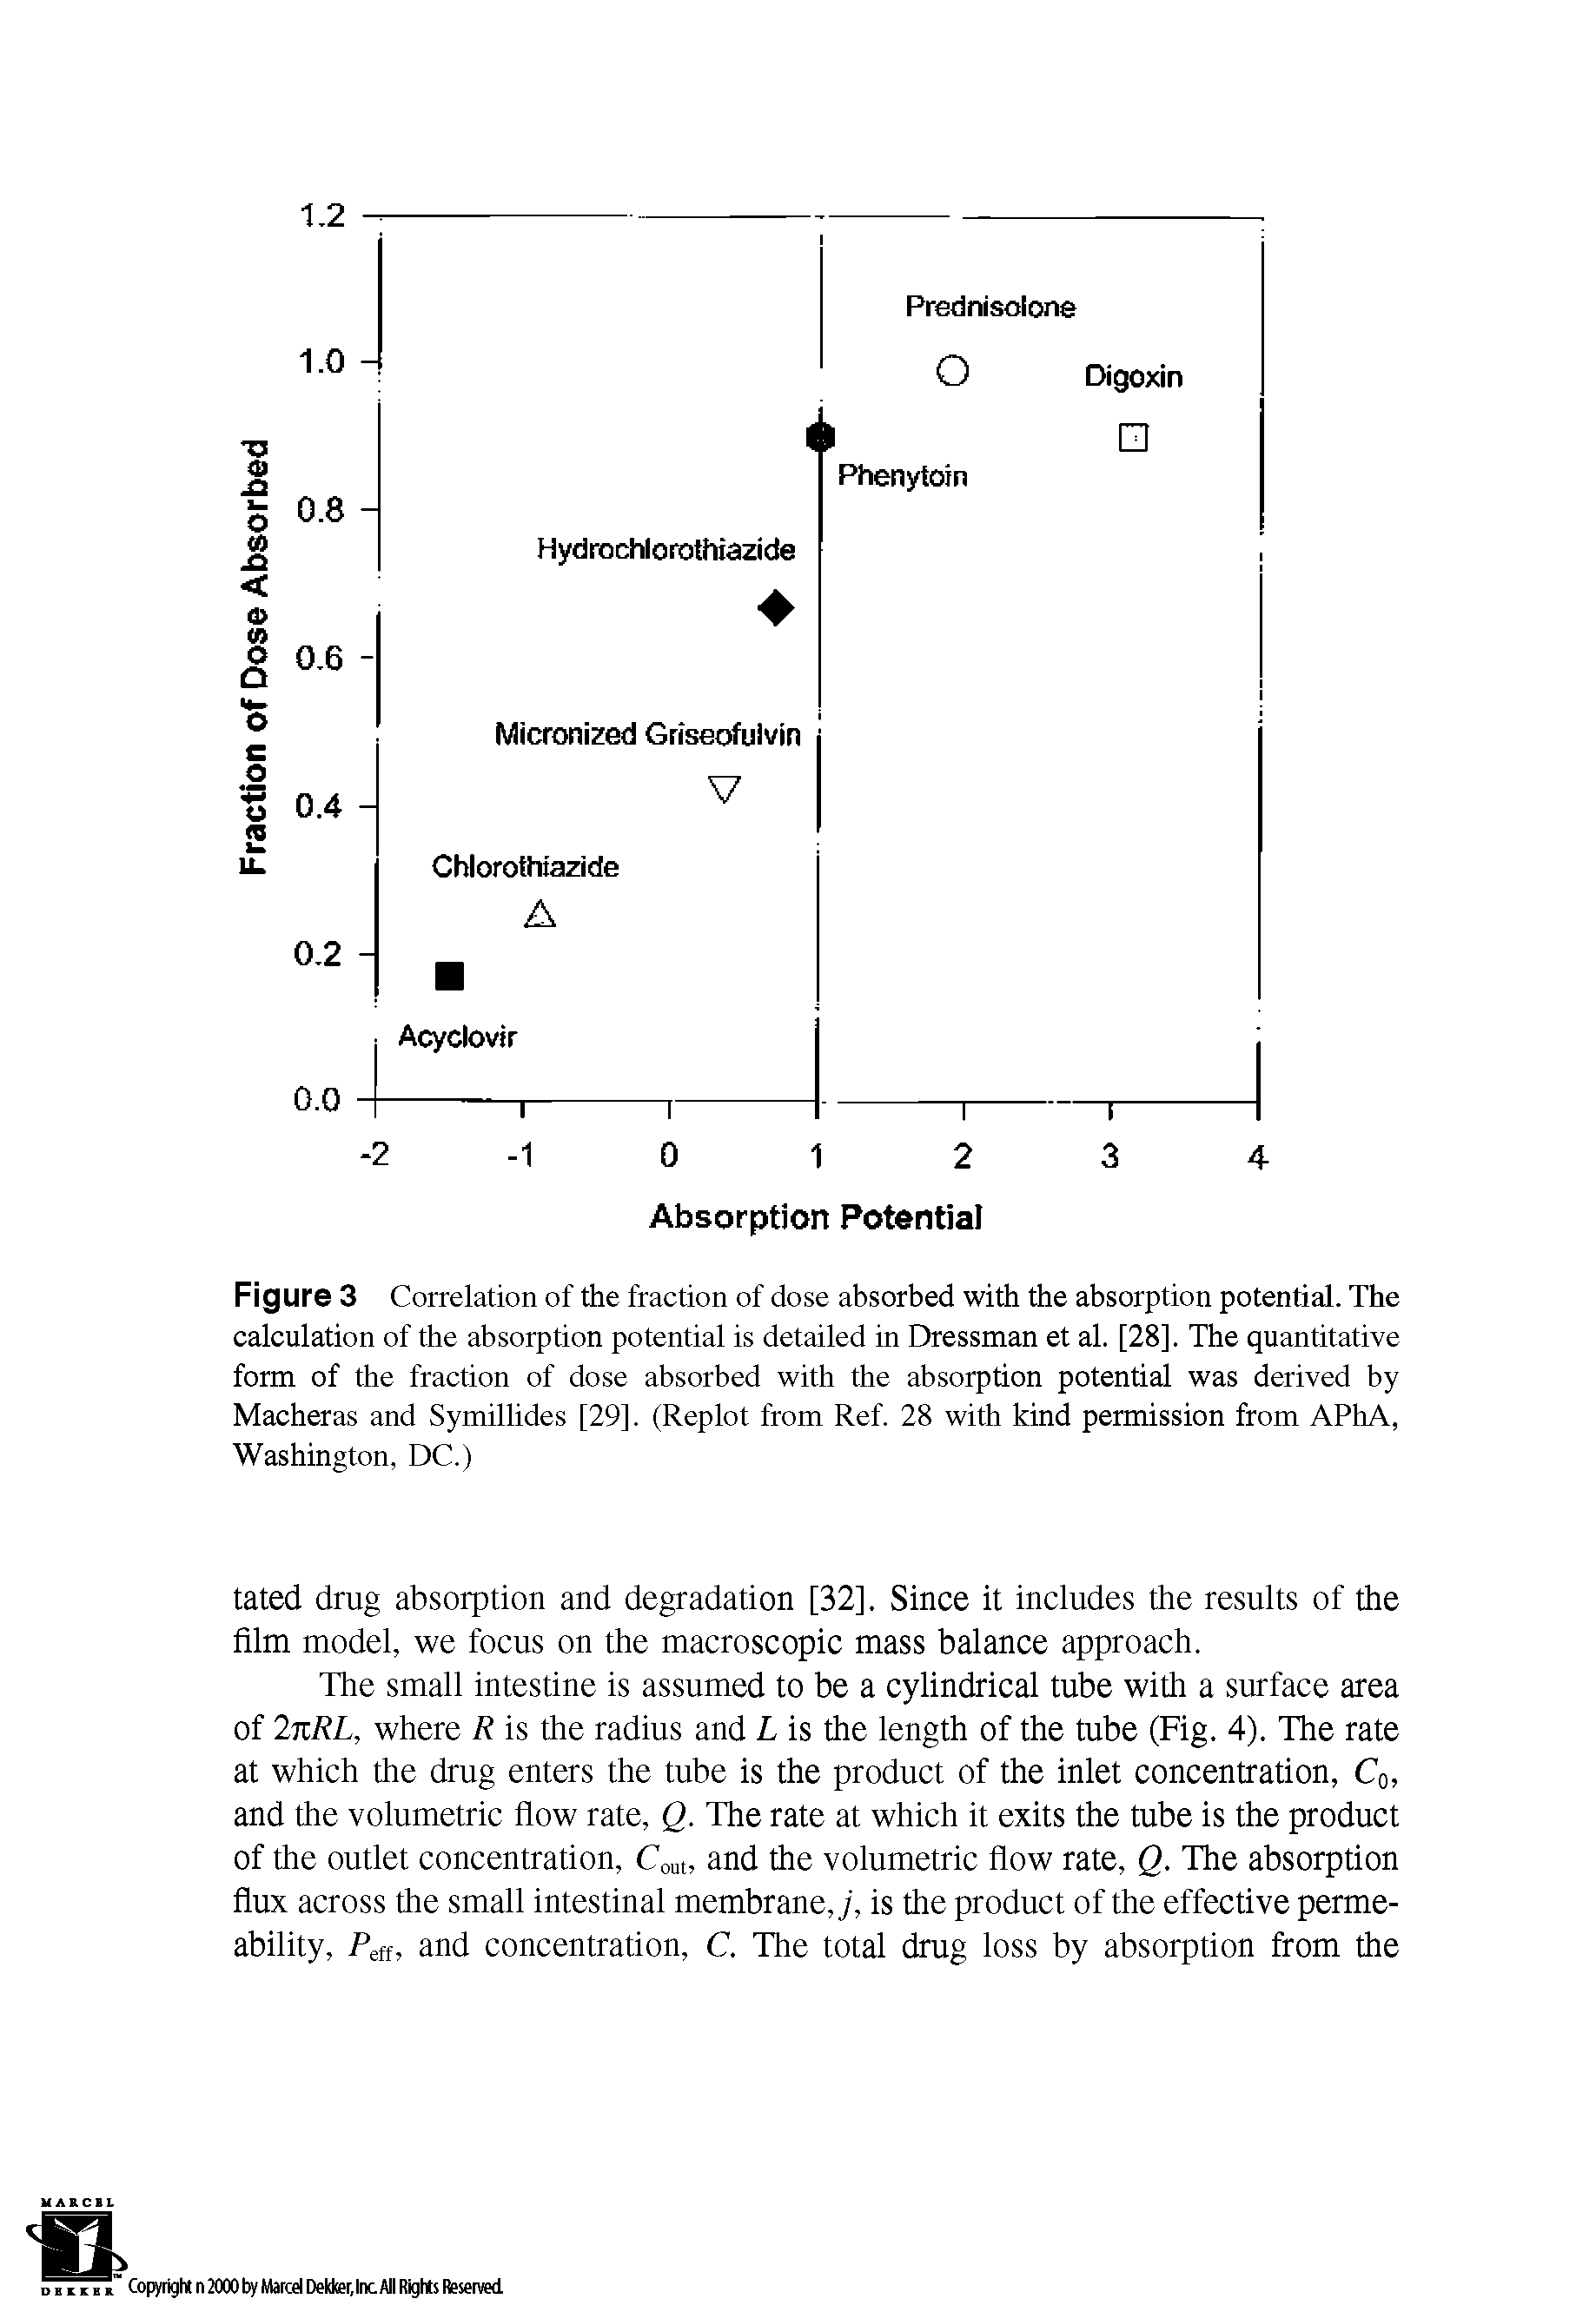 Figure 3 Correlation of the fraction of dose absorbed with the absorption potential. The calculation of the absorption potential is detailed in Dressman et al. [28], The quantitative form of the fraction of dose absorbed with the absorption potential was derived by Macheras and Symillides [29]. (Replot from Ref. 28 with kind permission from APhA, Washington, DC.)...